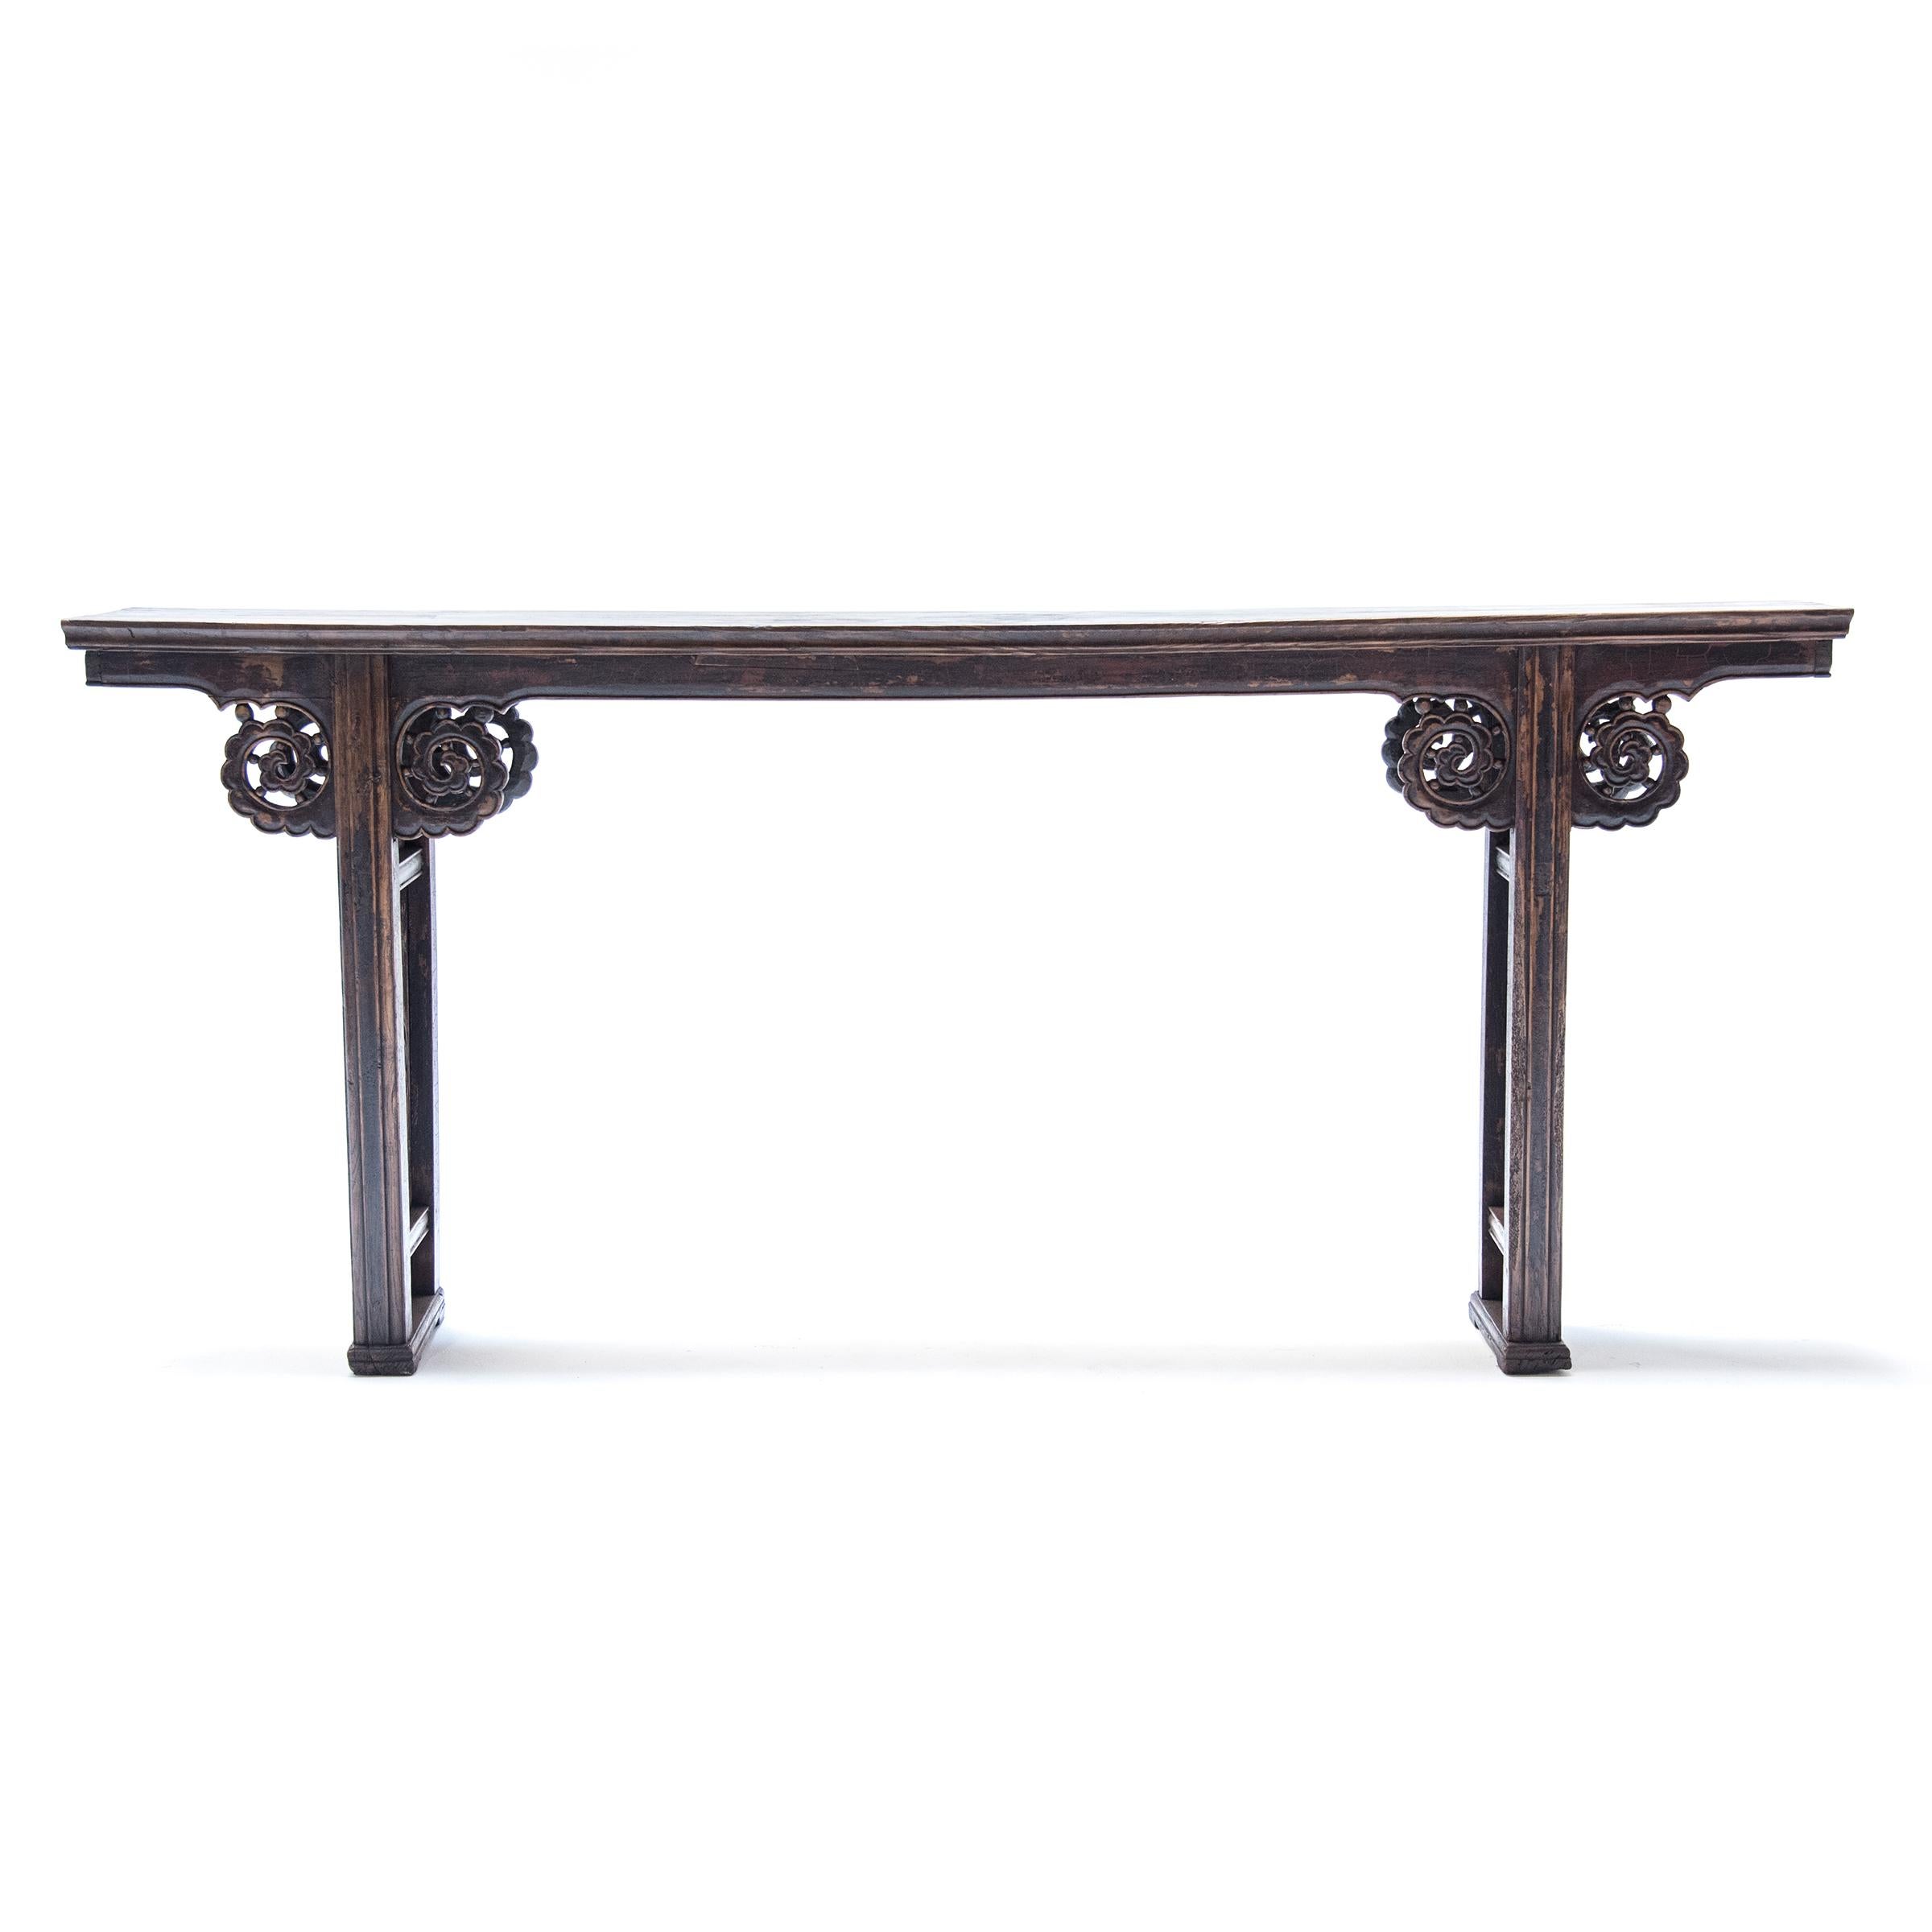 Carved Chinese Altar Table with Inset Ruyi Panels, C. 1850